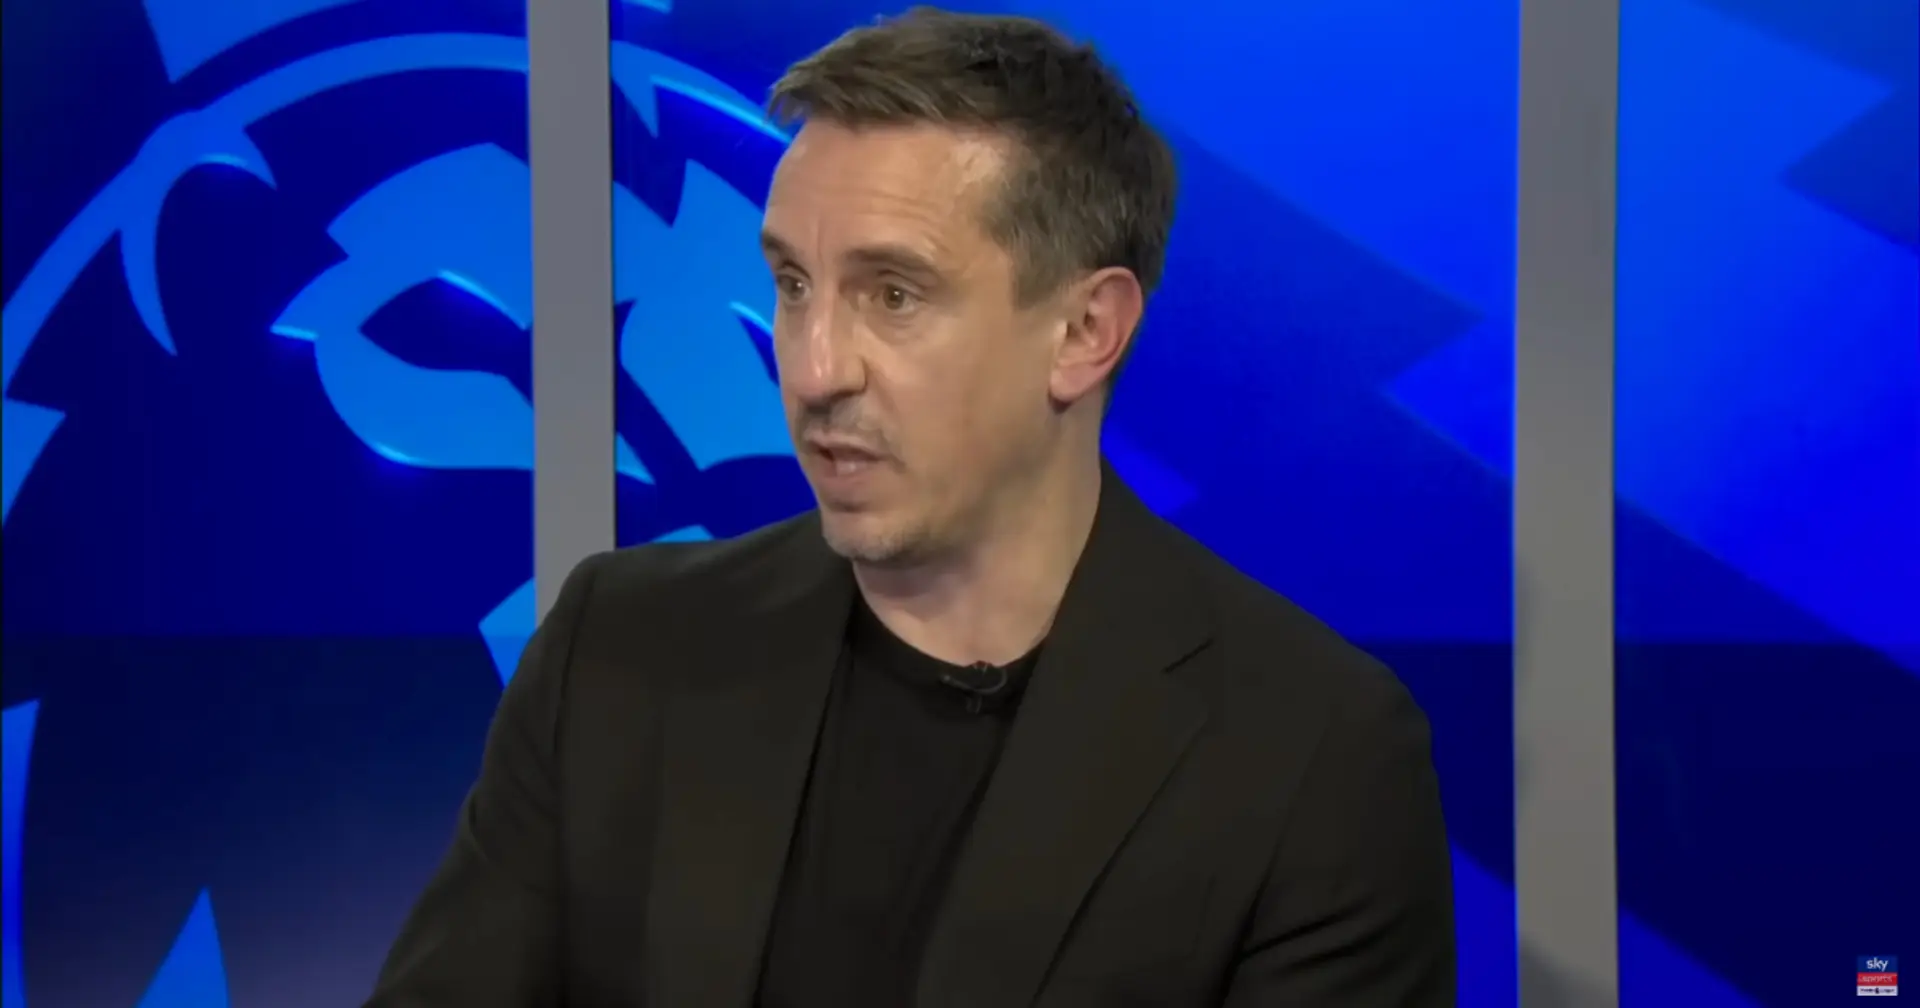 Can Man United make top 4 after Man City defeat? Gary Neville shares interest take